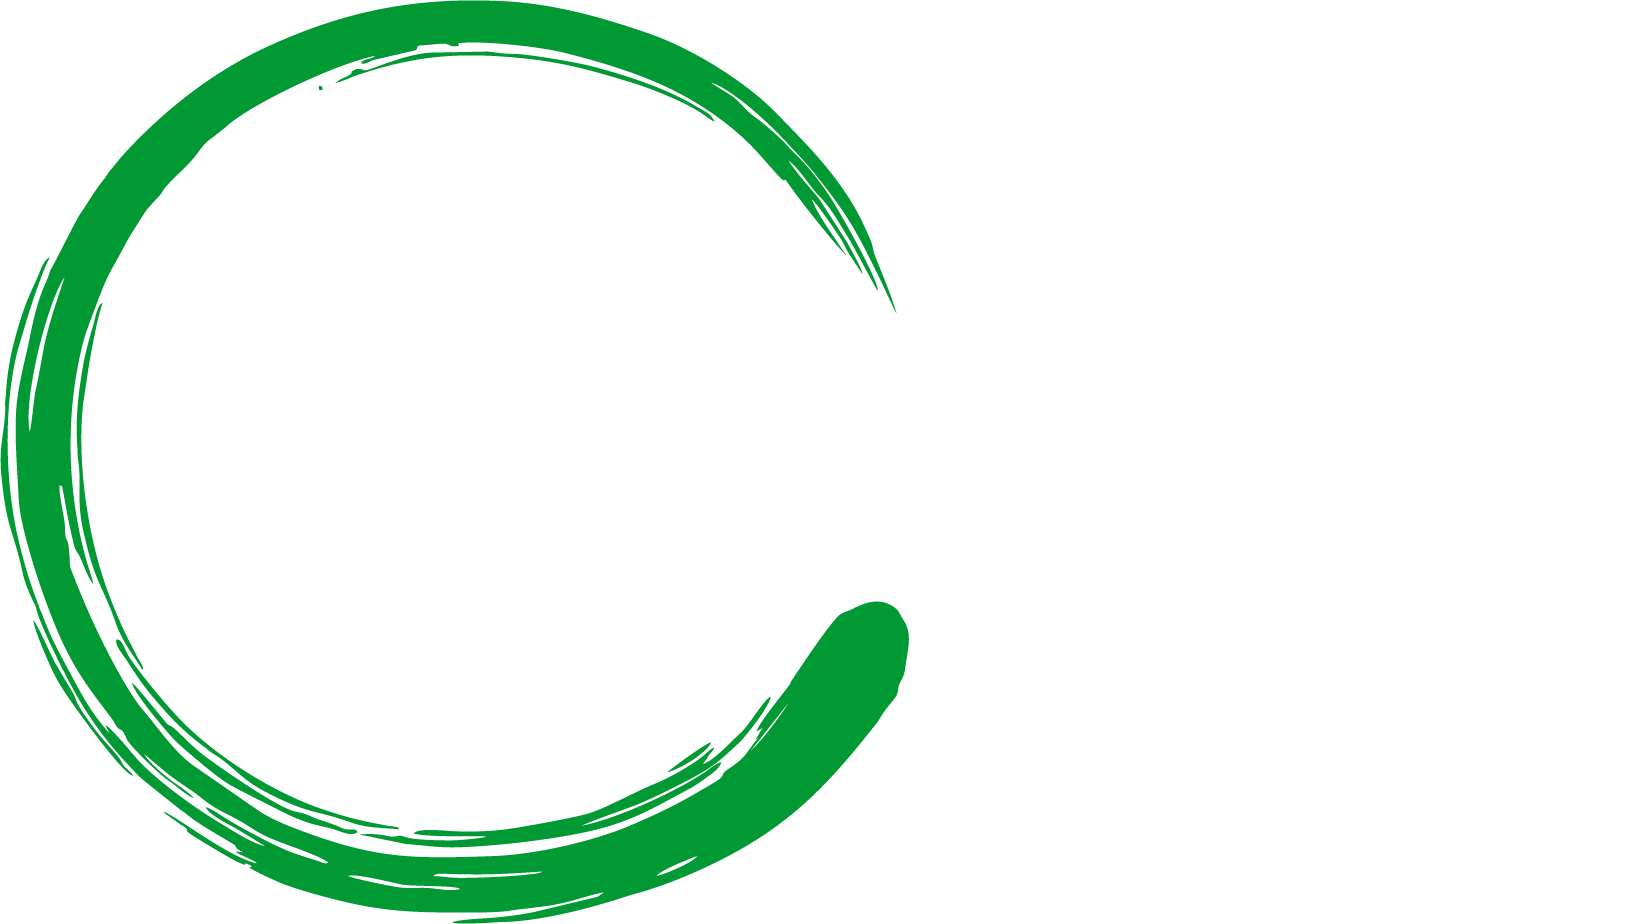 Firm logo with text written in white that reads Adelman firm